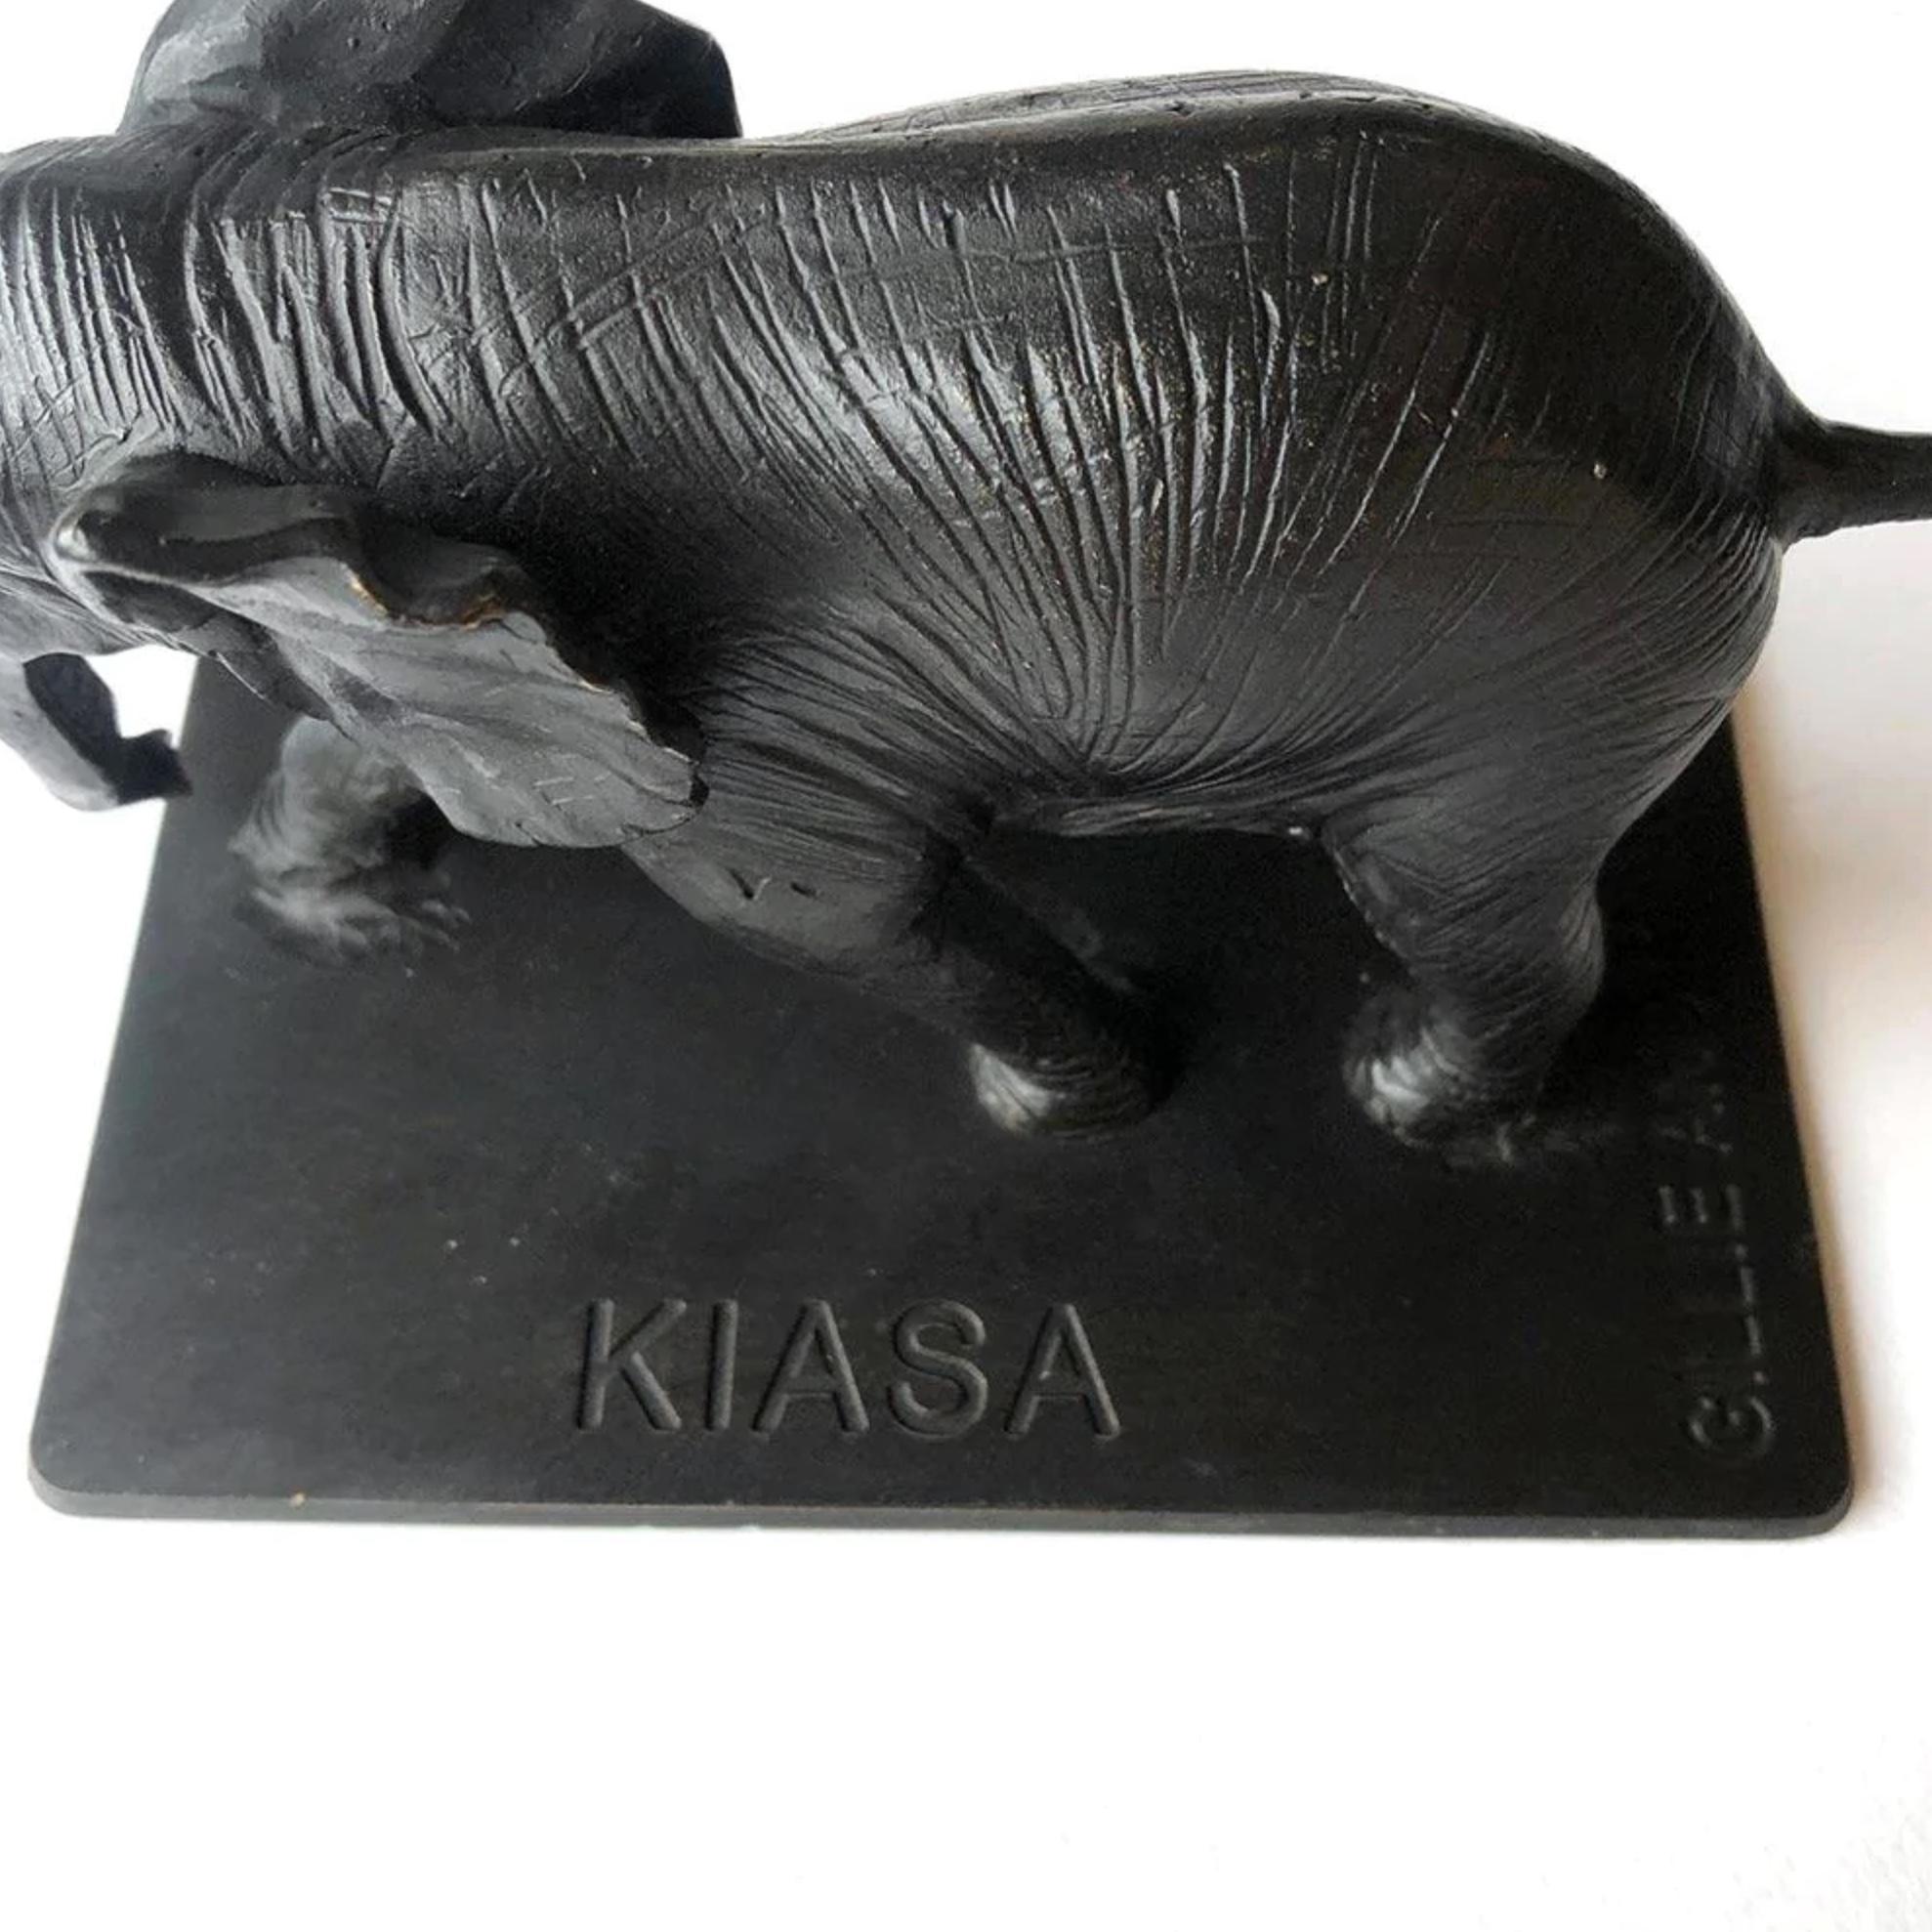 Authentic Bronze Orphan Kiasa Elephant Sculpture by Gillie and Marc For Sale 6